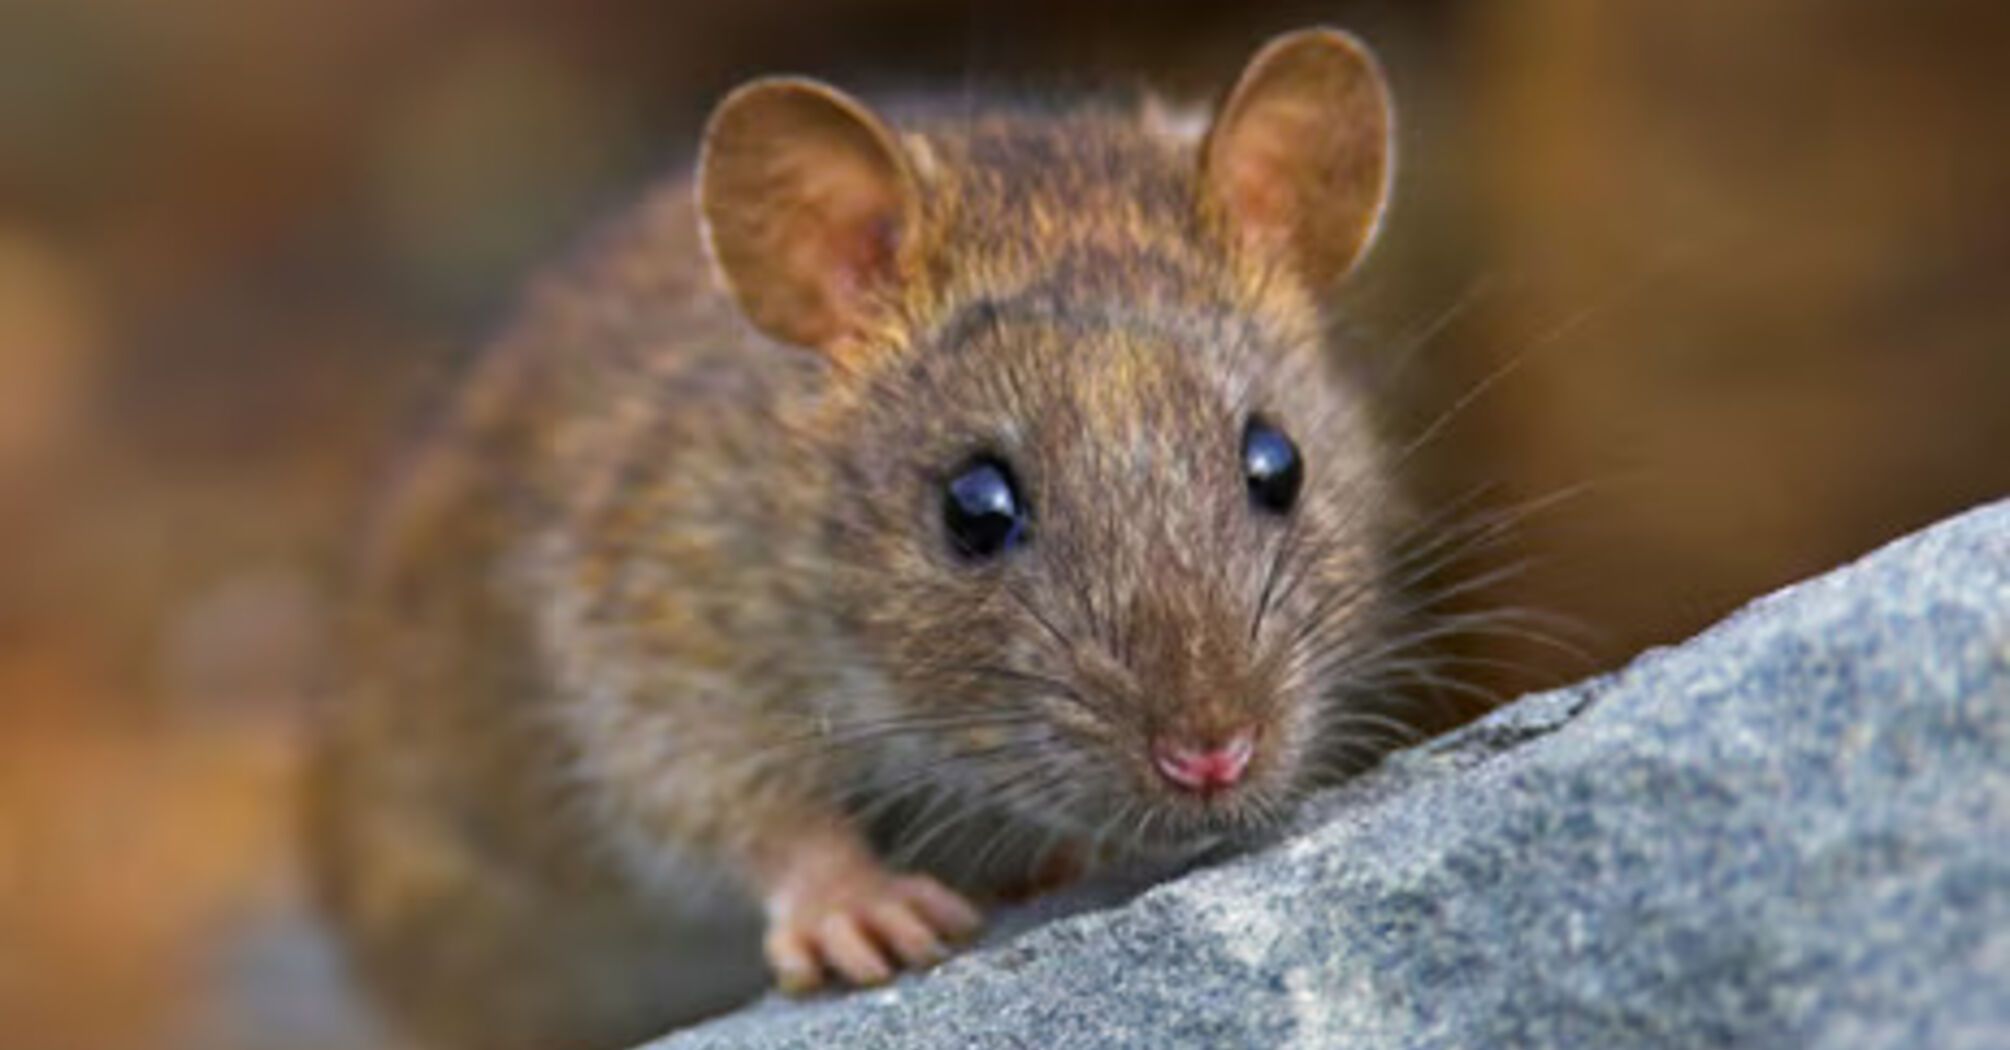 An amazing study reveals almost human-like abilities in rats